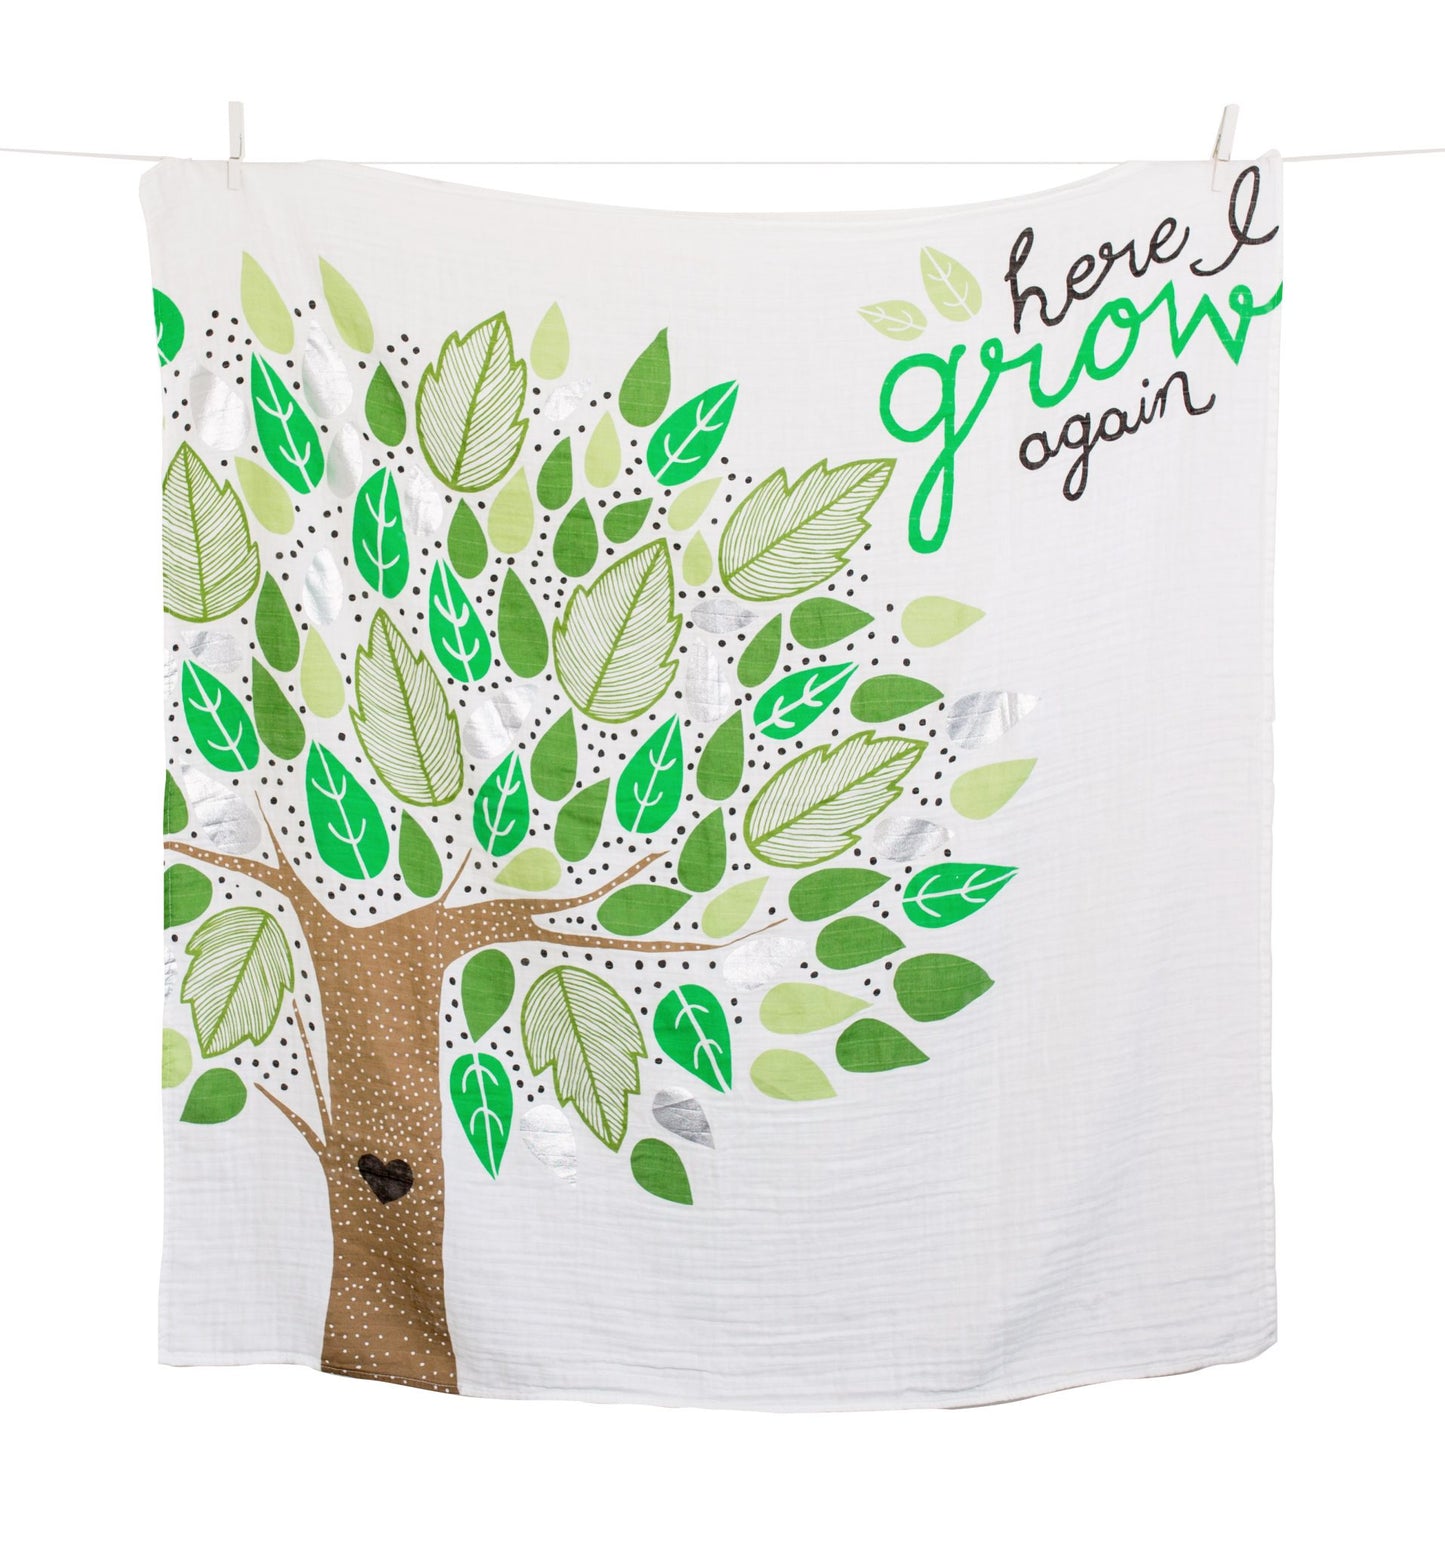 here i grow again milestone blanket hanging on a close line against a white background